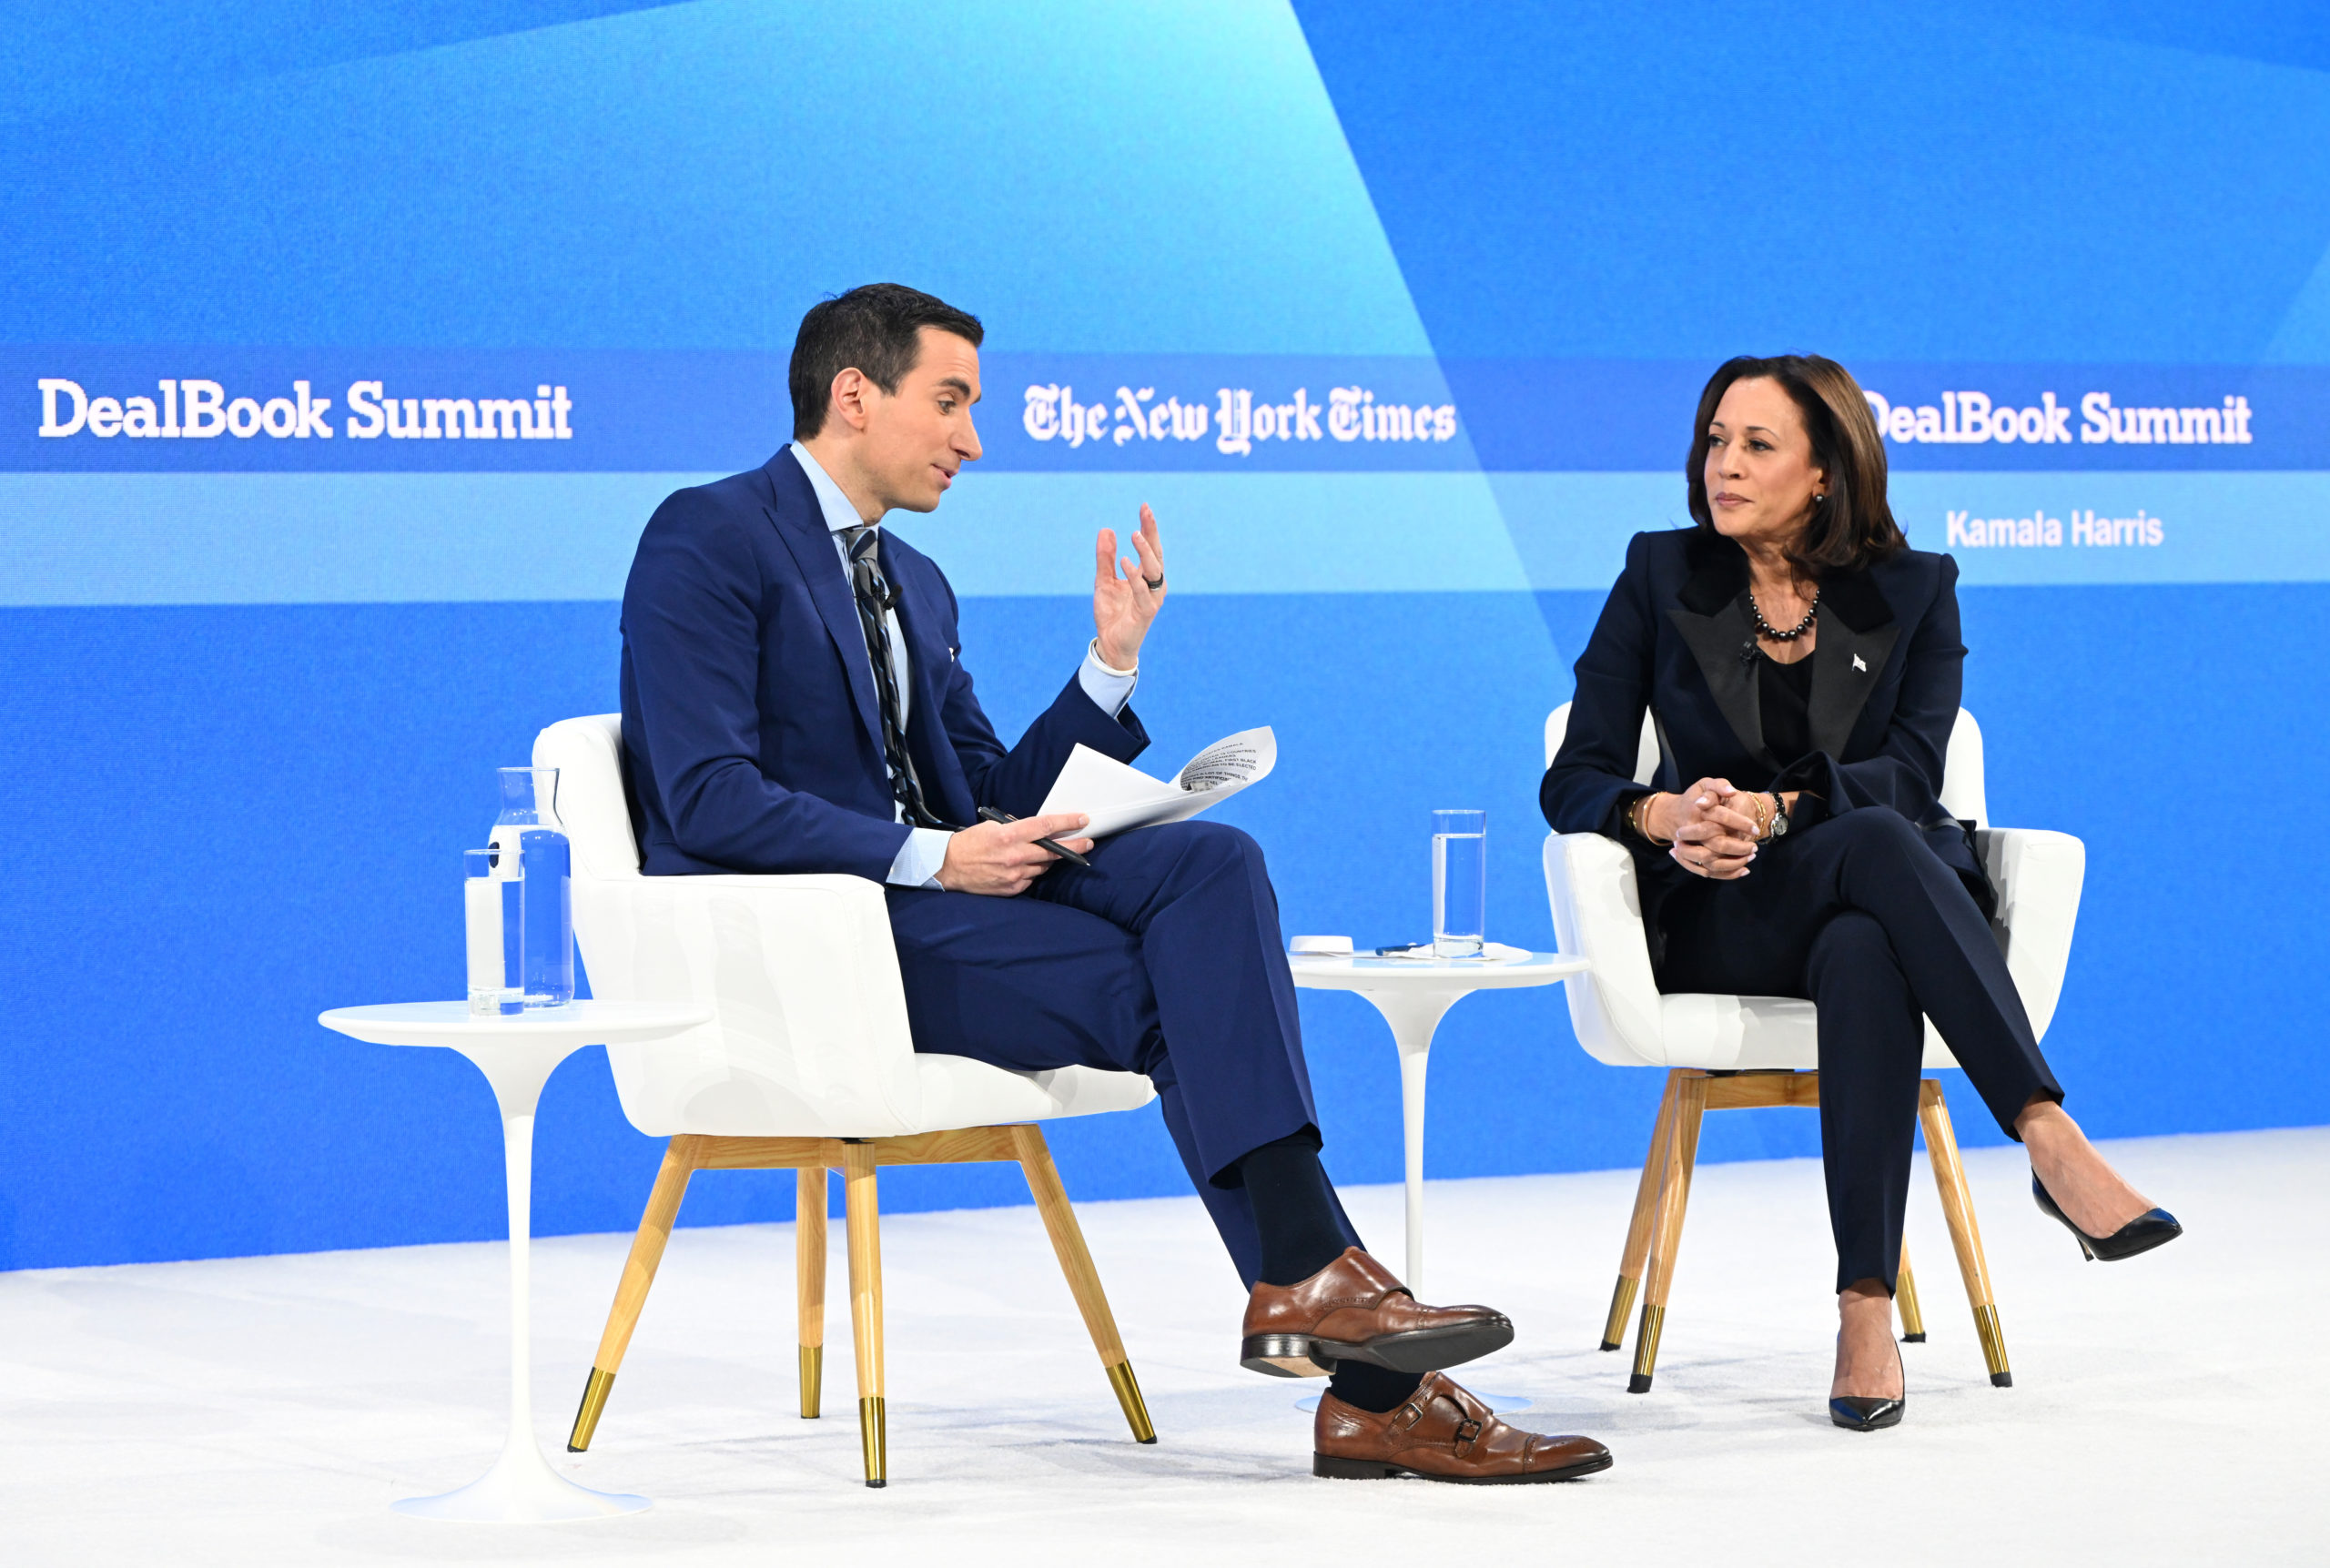 Andrew Ross Sorkin and Vice President Kamala Harris speak onstage during The New York Times Dealbook Summit 2023 at Jazz at Lincoln Center on November 29, 2023 in New York City. (Photo by Slaven Vlasic/Getty Images for The New York Times)